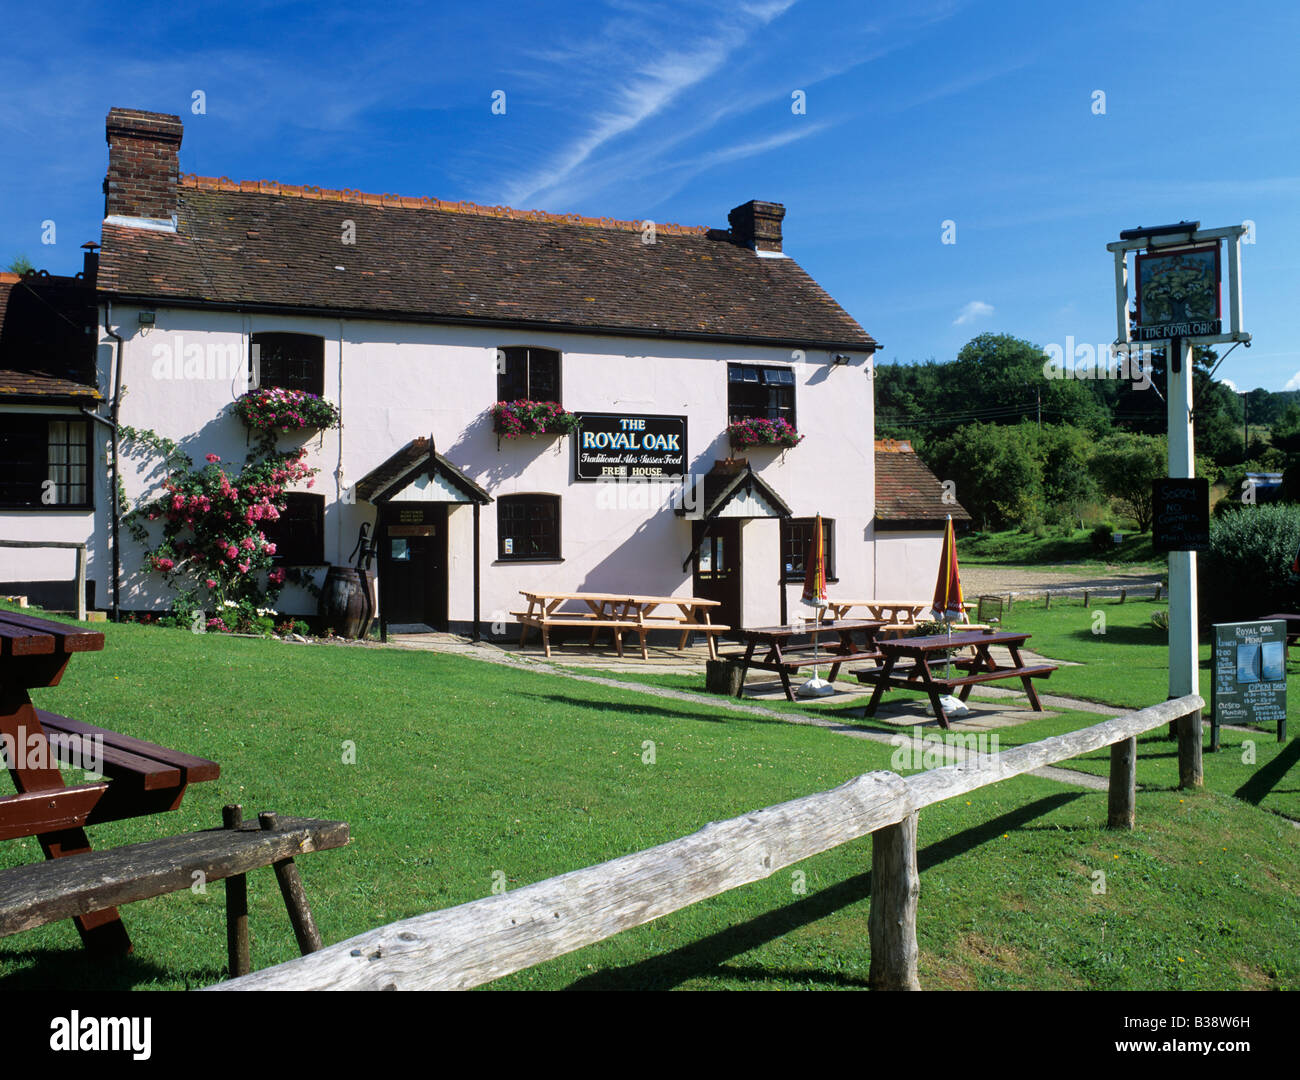 Royal Oak traditional English country pub said to be haunted by 17thc ghost of a sheep rustler. Hooksway West Sussex England UK Stock Photo